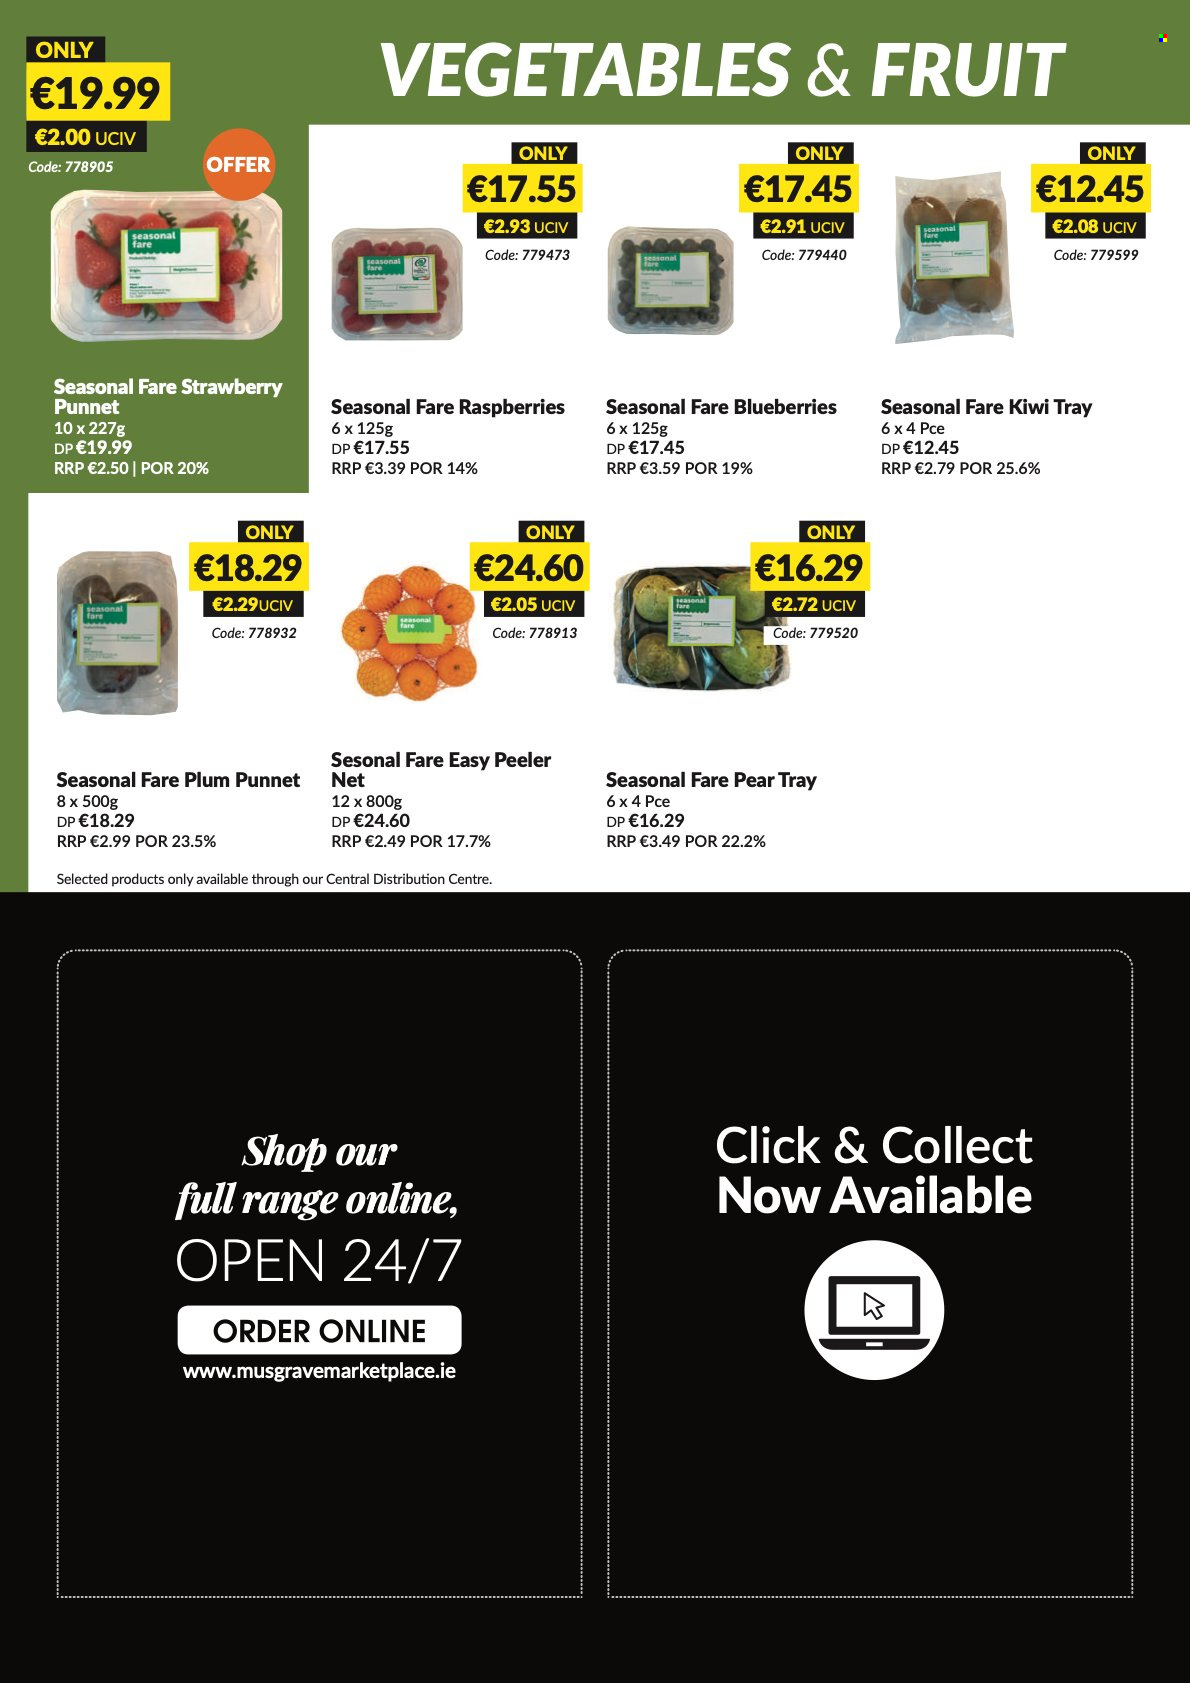 thumbnail - MUSGRAVE Market Place offer  - 08.05.2022 - 04.06.2022 - Sales products - blueberries, kiwi, pears, tray, peeler. Page 10.